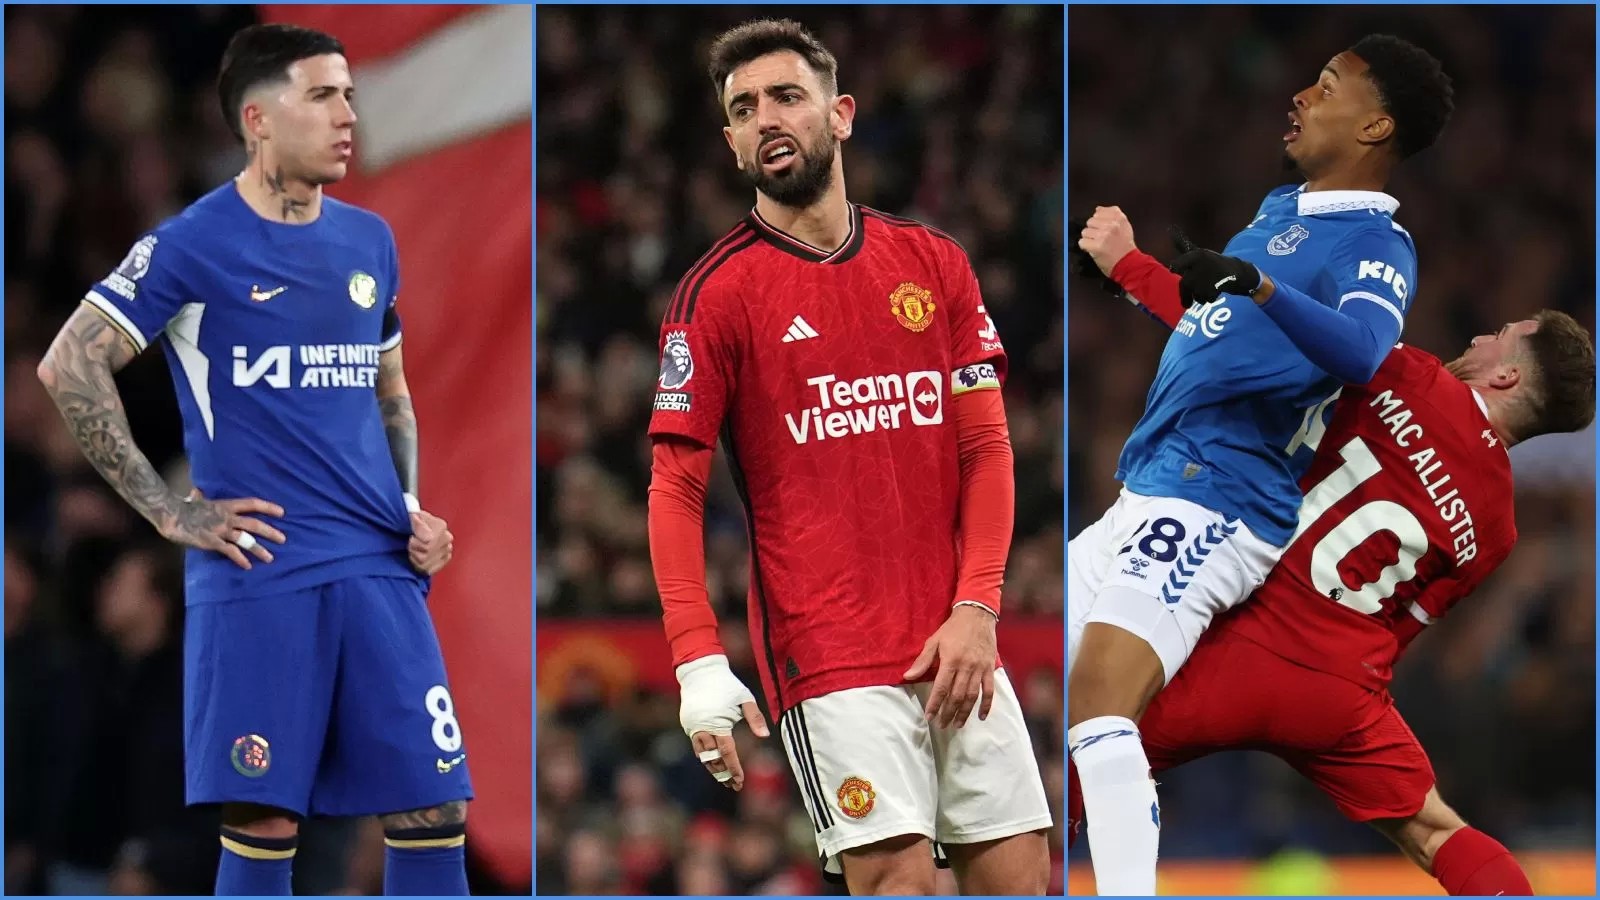 Premier League winners and losers: Arsenal, Fernandes, Mateta amazing but Chelsea and Liverpool shocking